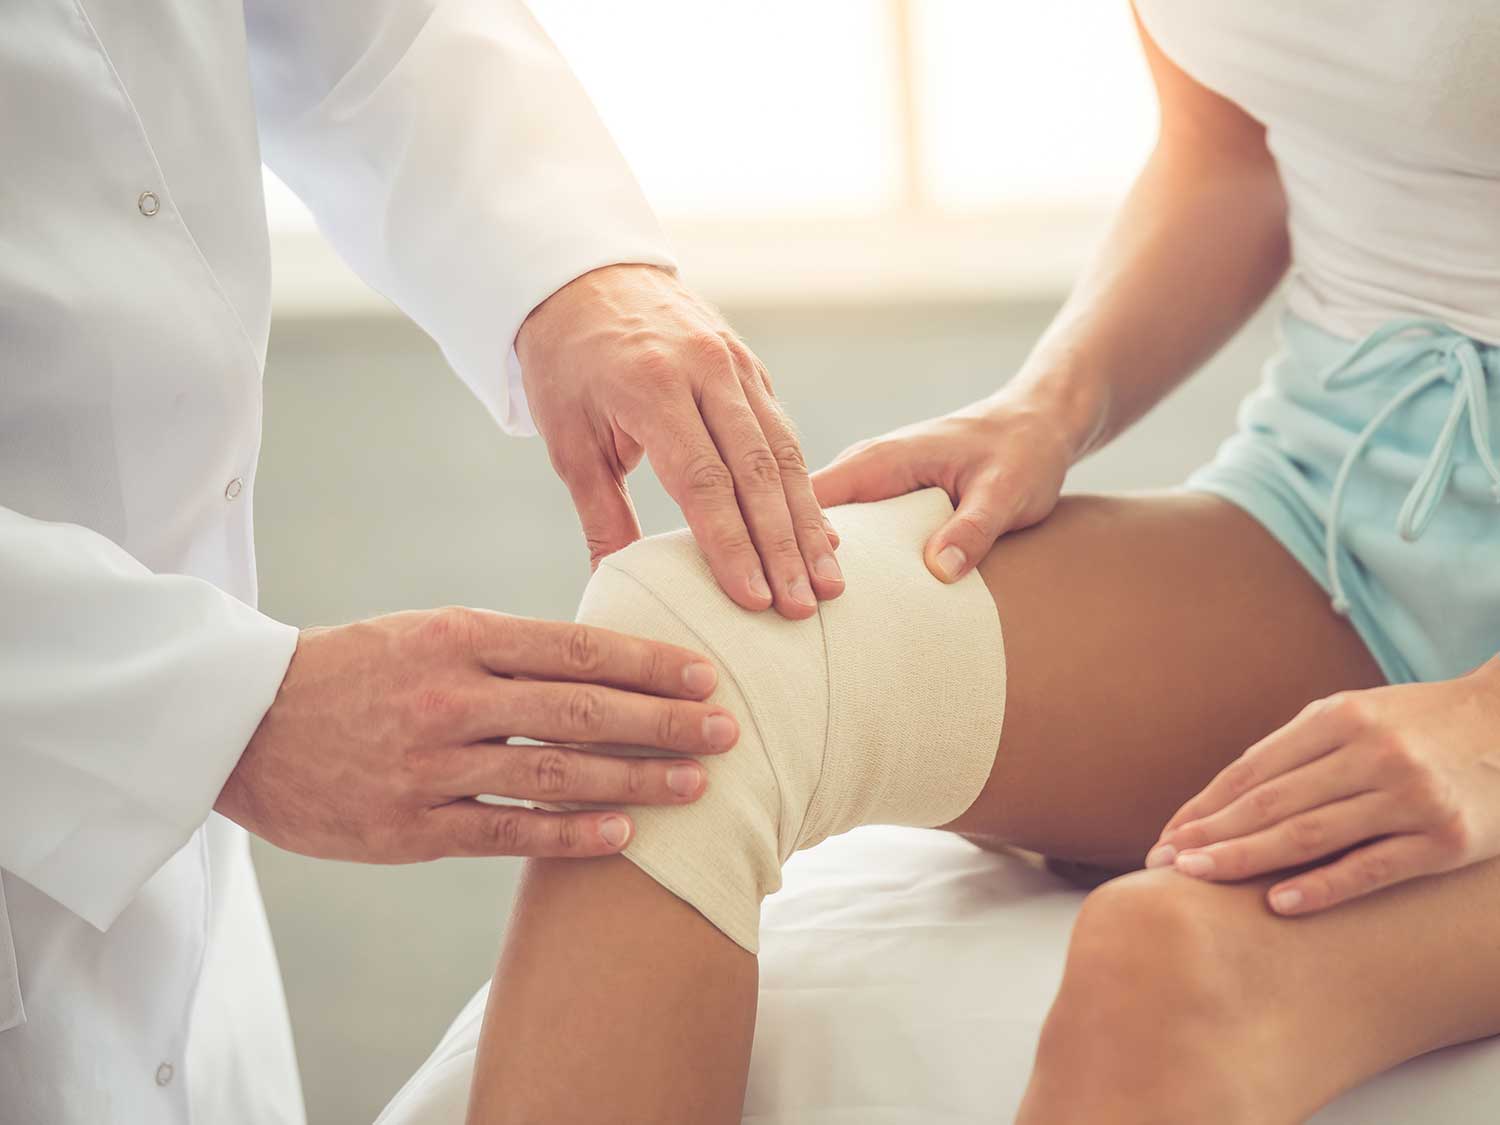 An Orthopedic Surgeon With Liability Coverage Examining The Bandaged Knee Of A Patient